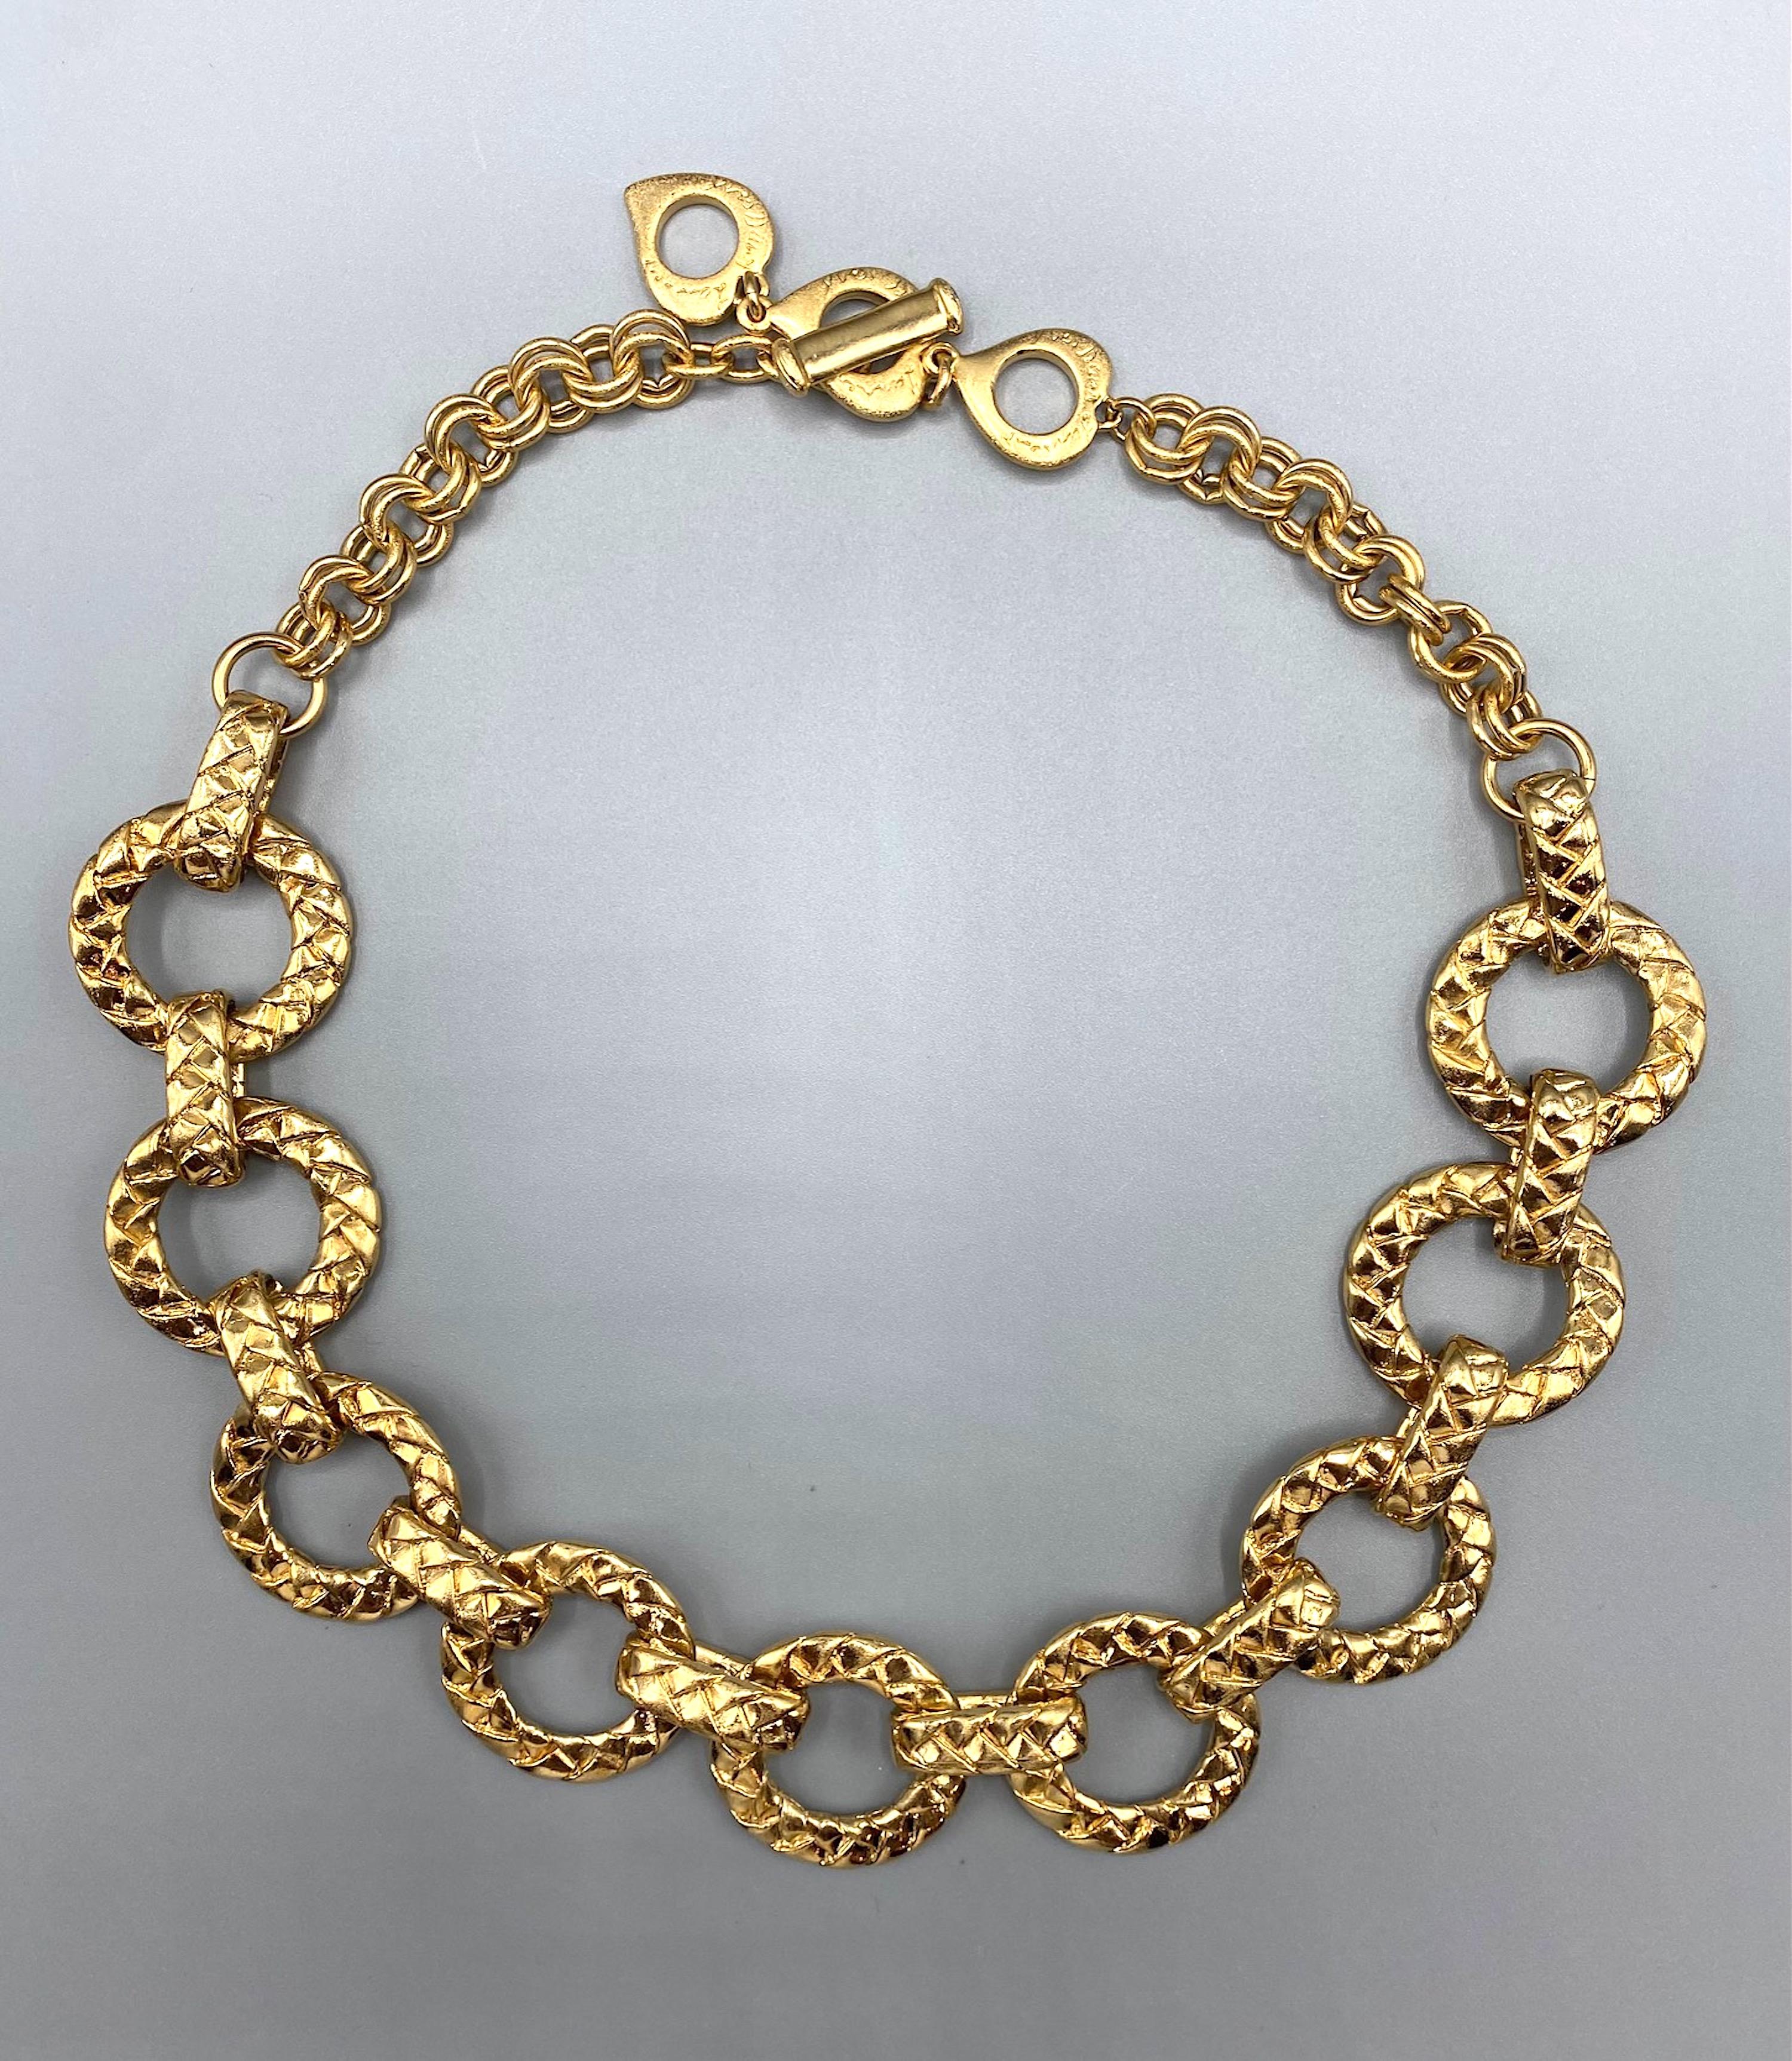 A wonderful 1980's example of Yves Saint Laurent bijoux. The necklace is comprised of 9 round and 10 oval connector links in the front and all done with a cast quilt design. These front quilt links have a double round link chain on each end. One